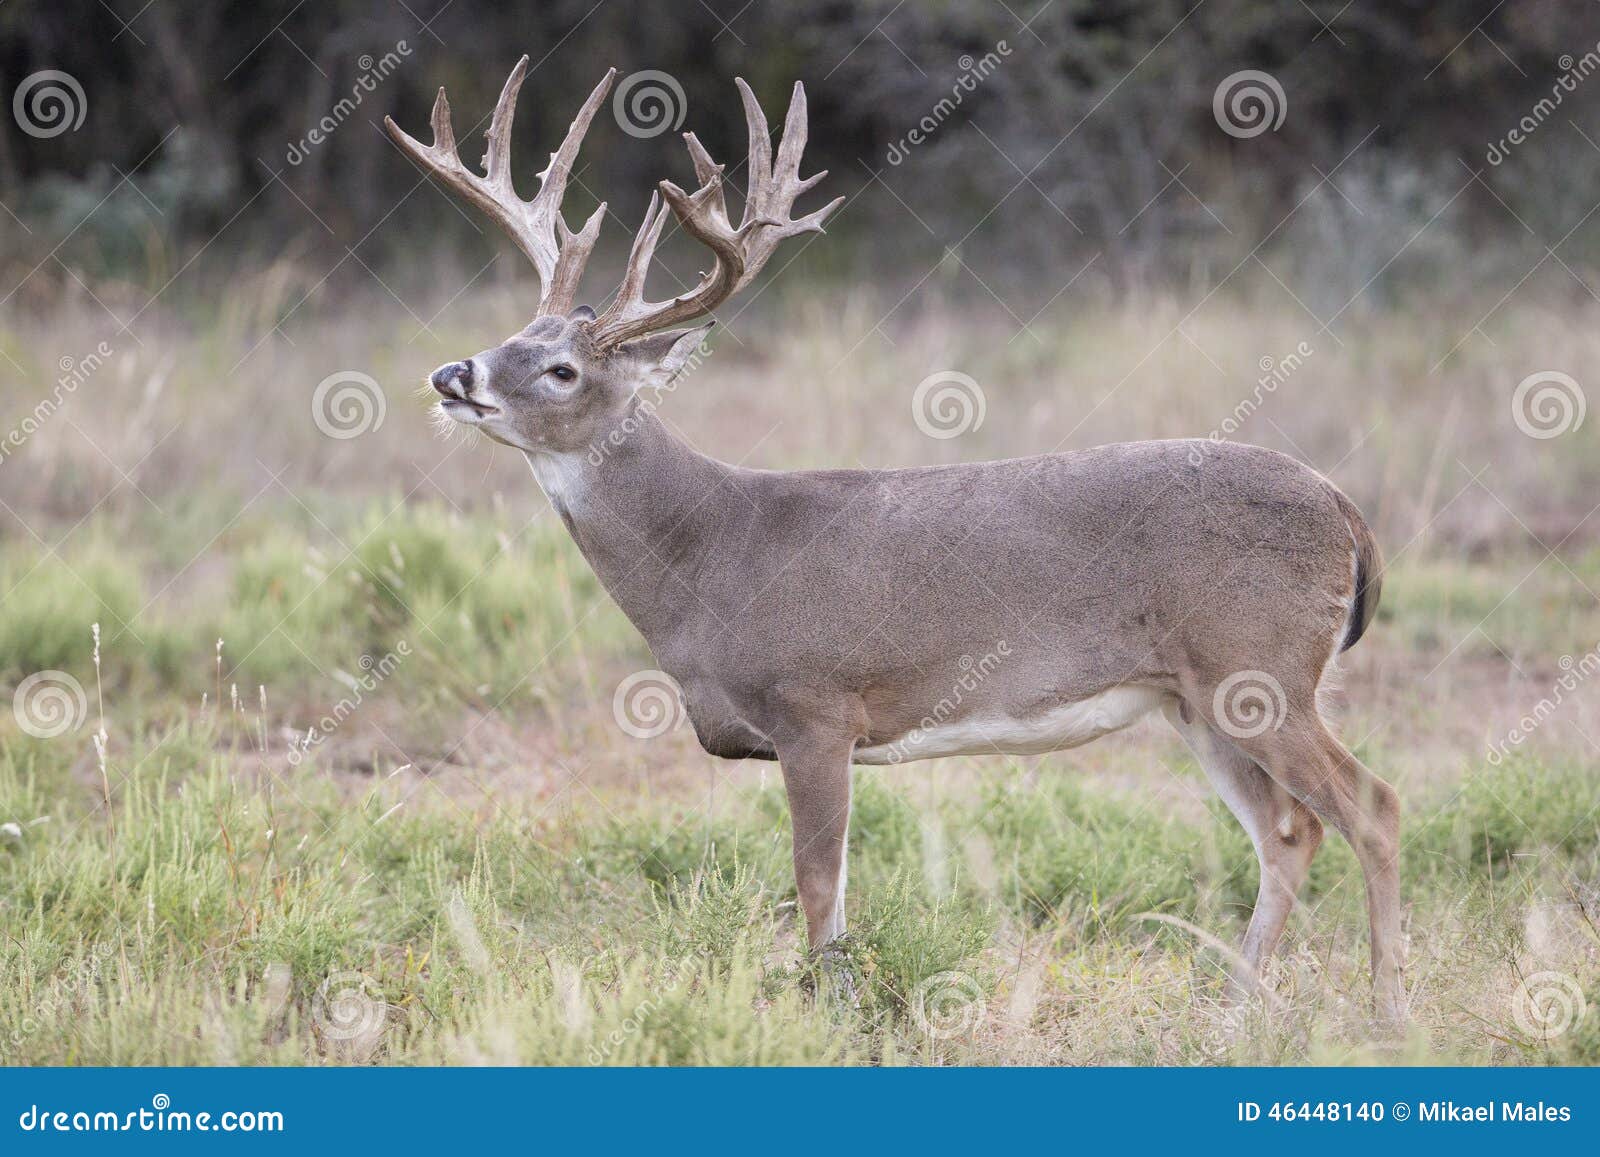 massive whitetail buck with head up